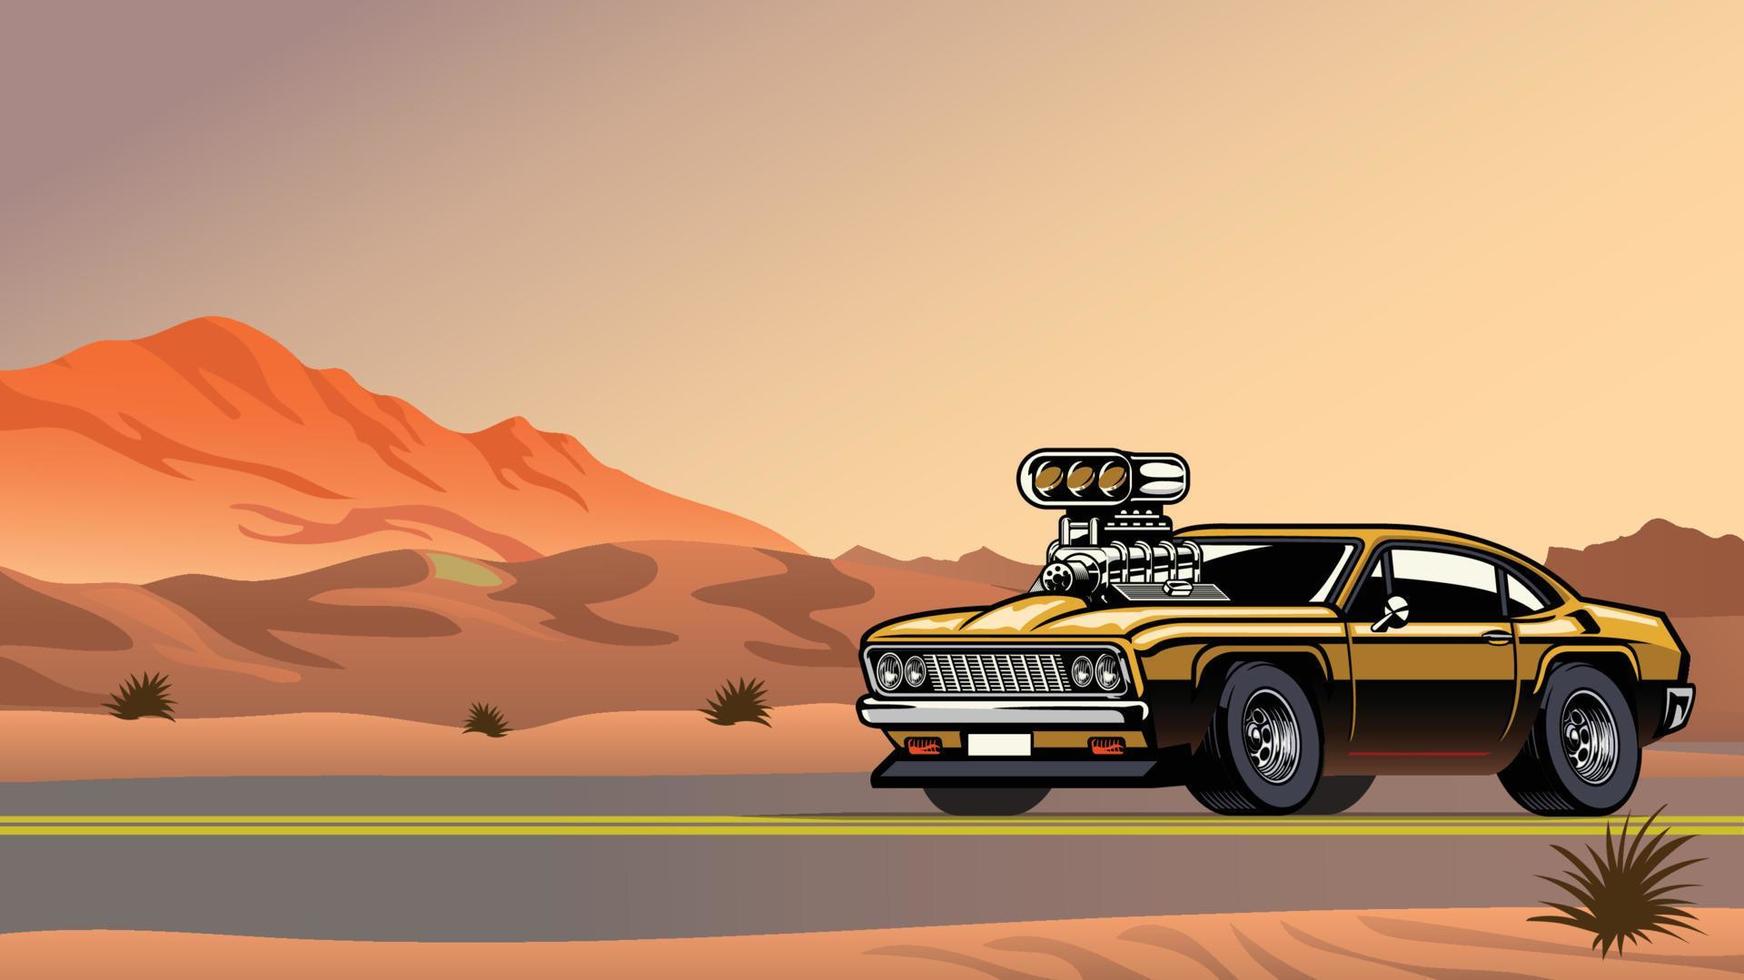 muscle car with big engine on the desert road vector